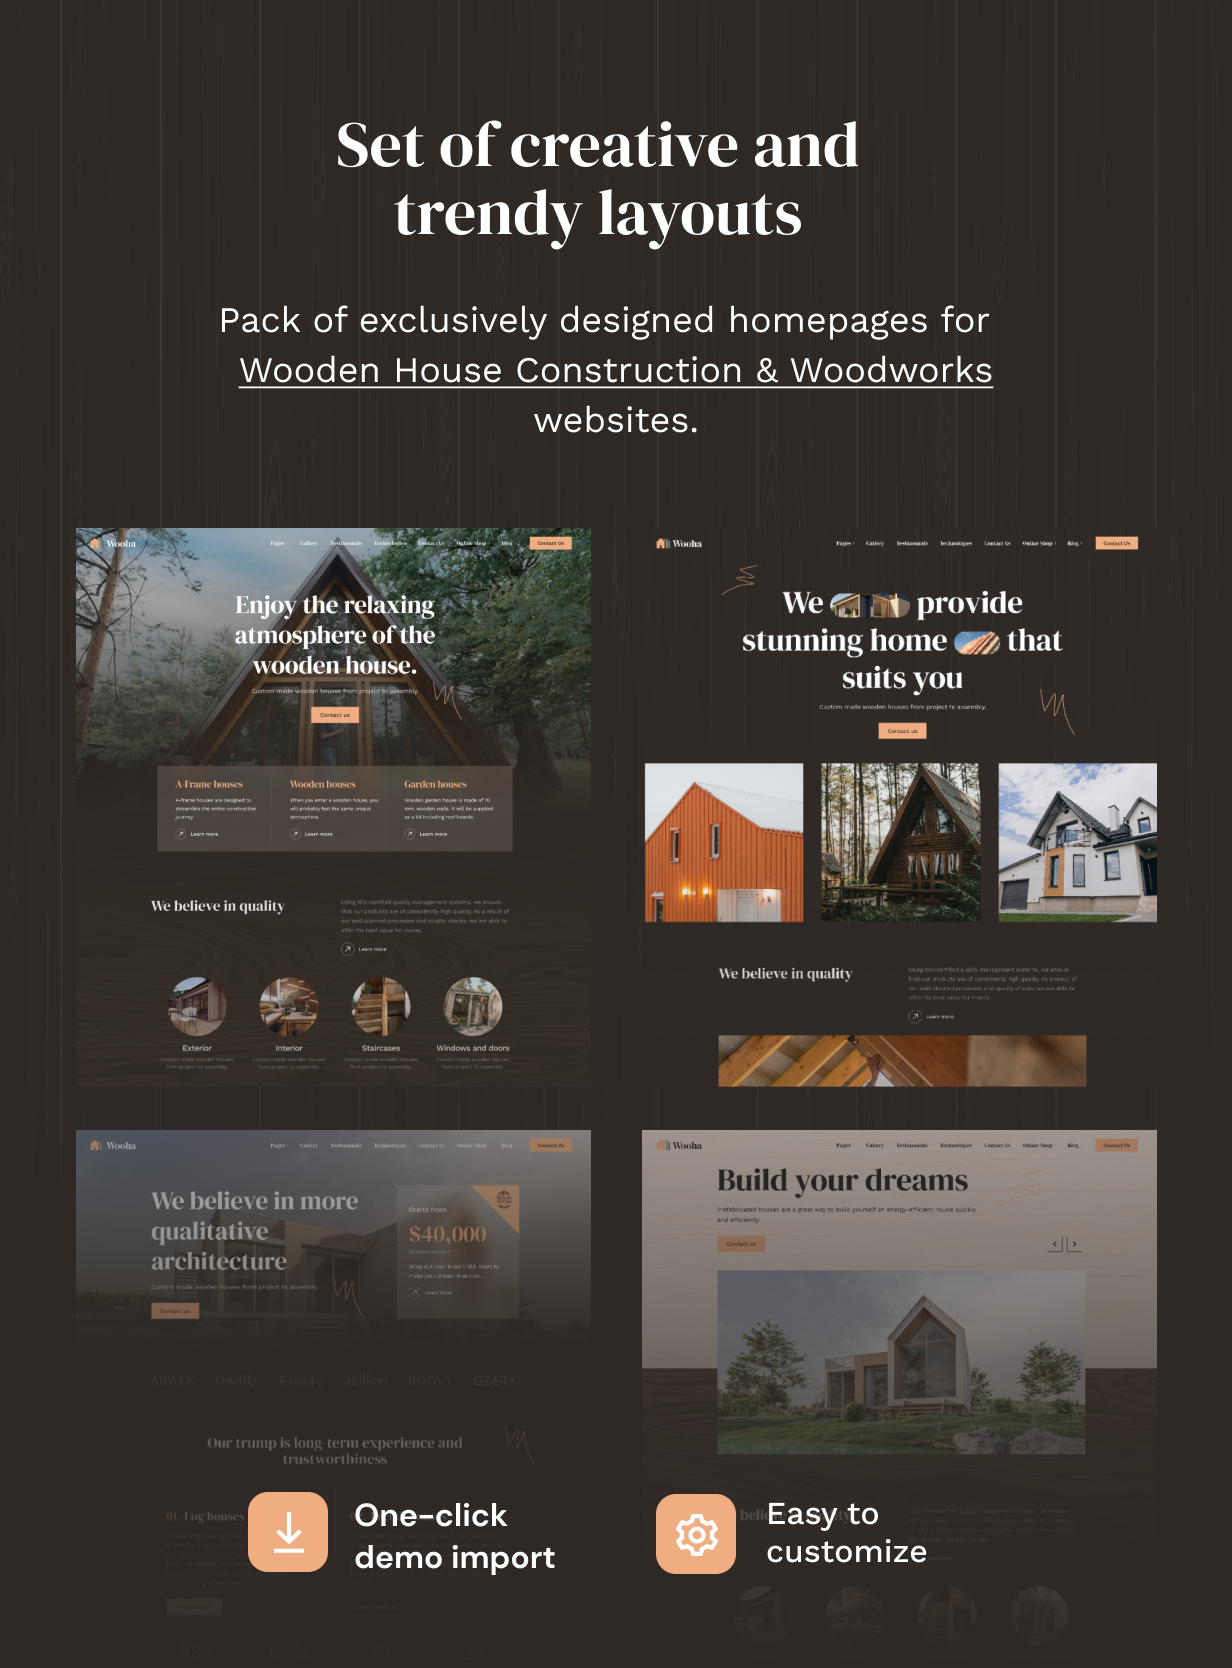 Wooha - Wooden House Construction & Woodworks WordPress Theme